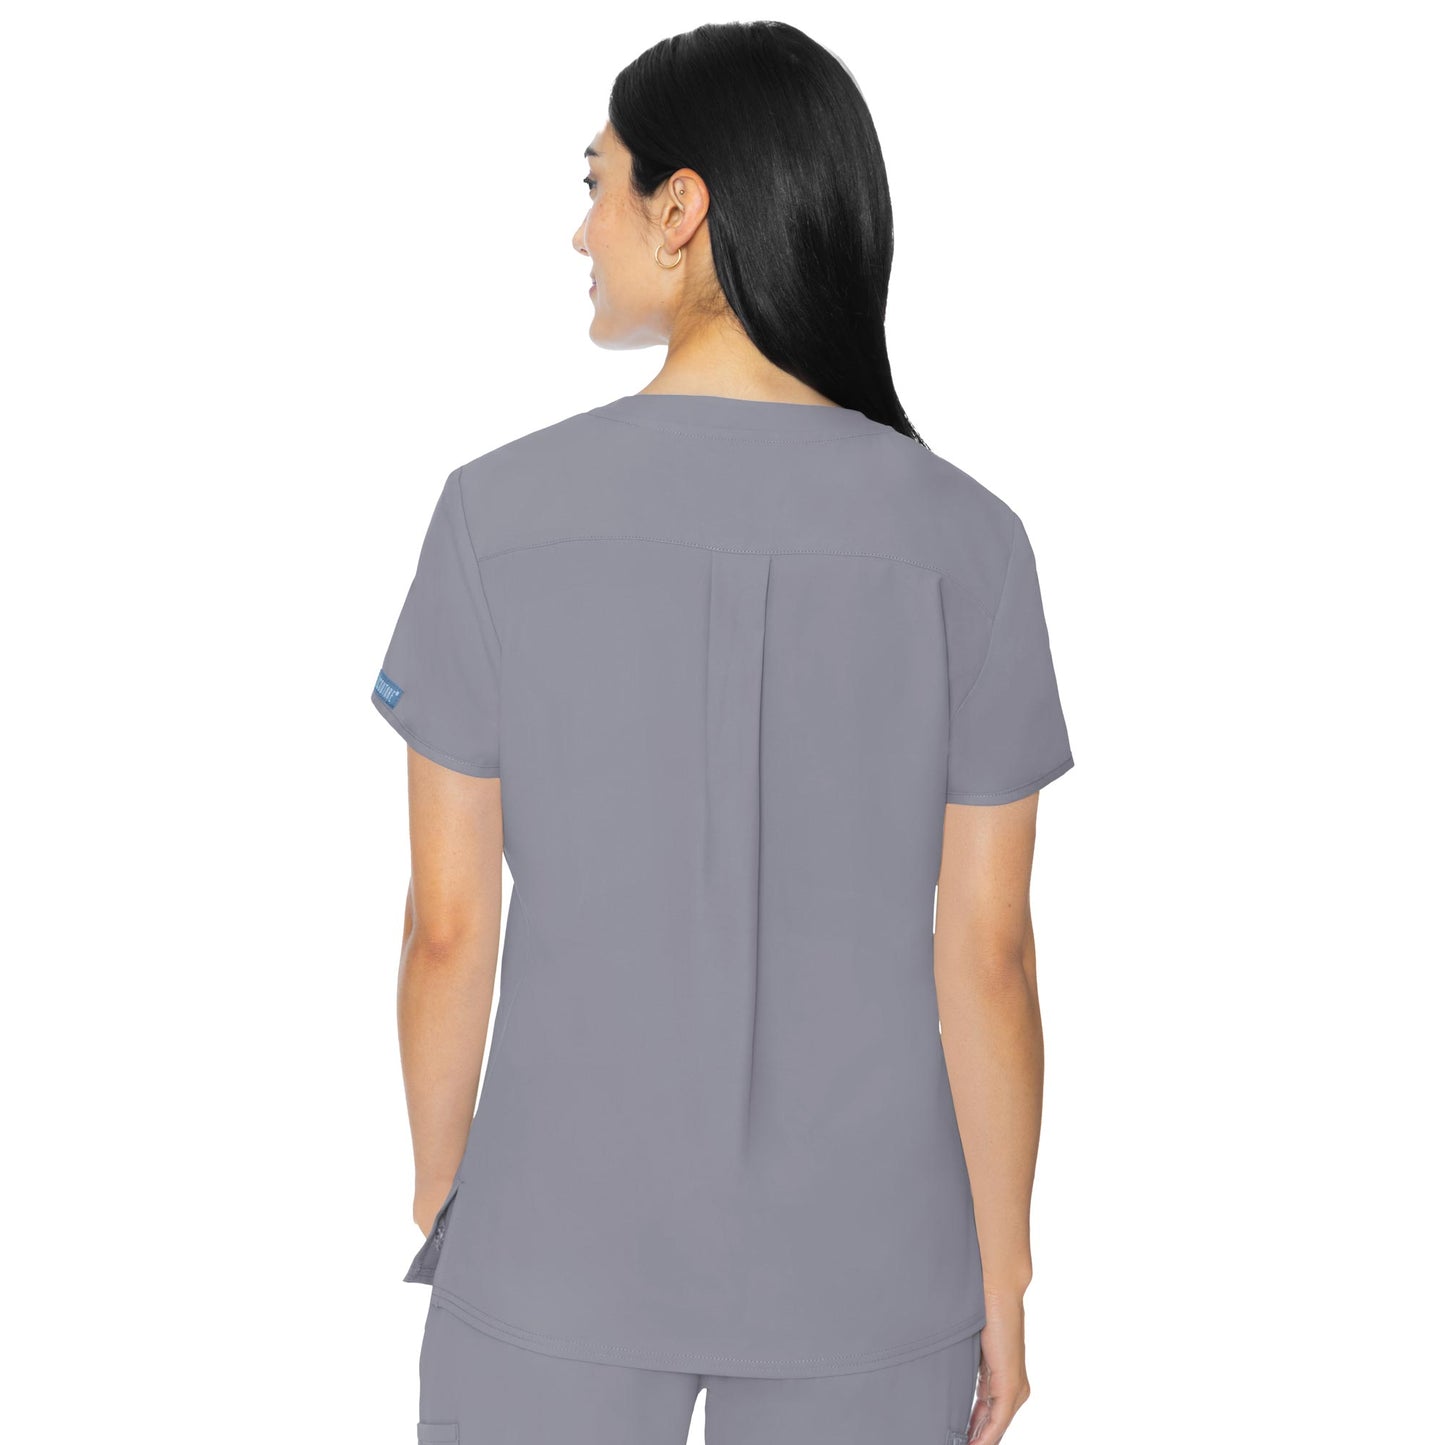 Med Couture Insight 3 Pocket Top (16 colors in XXS-XL)